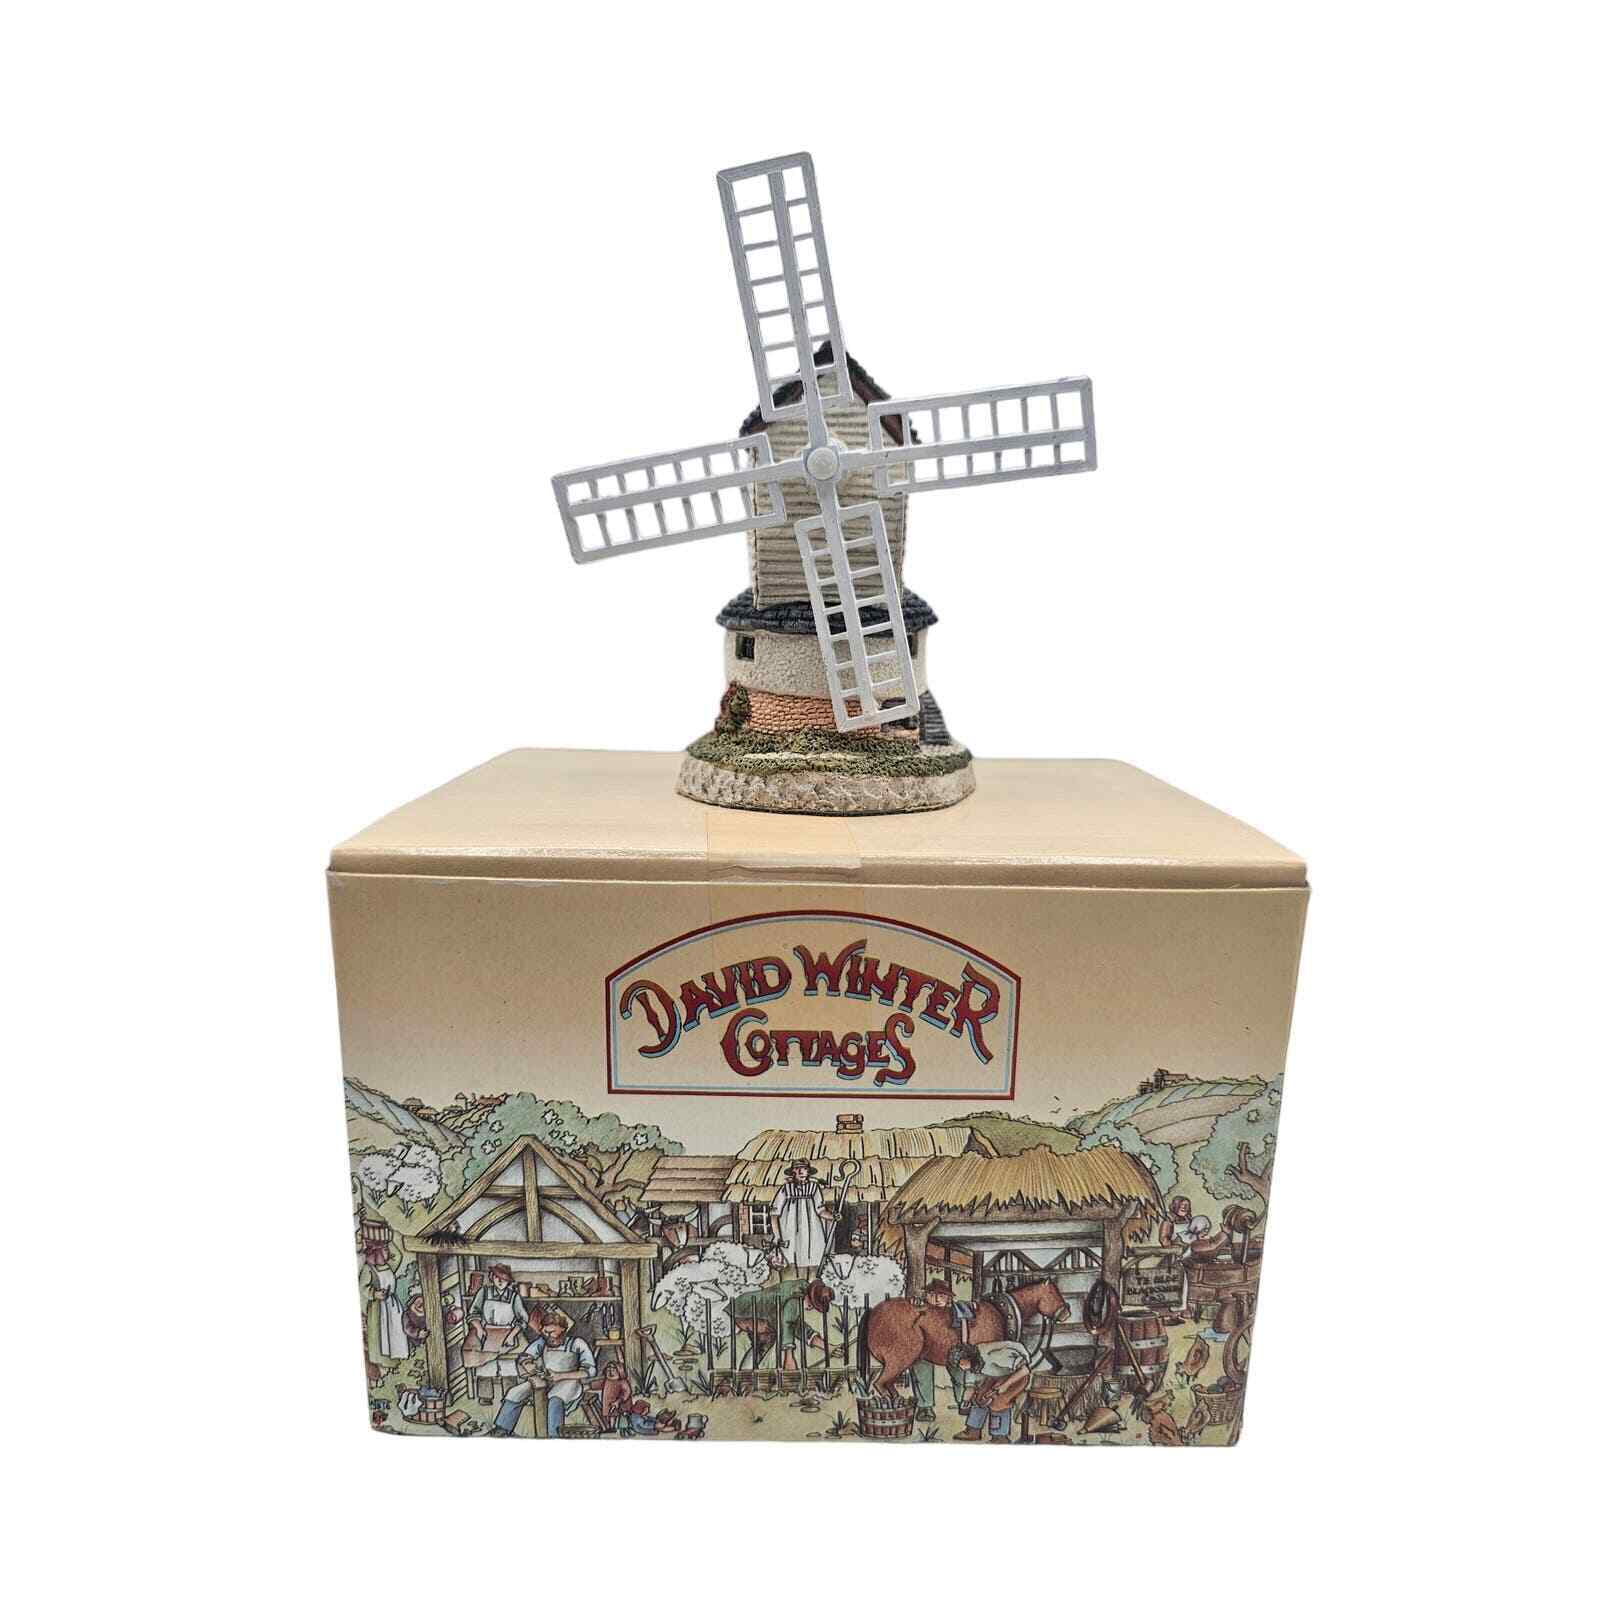 Vintage 1985 David Winter Cottages Moving Windmill Figure in Box